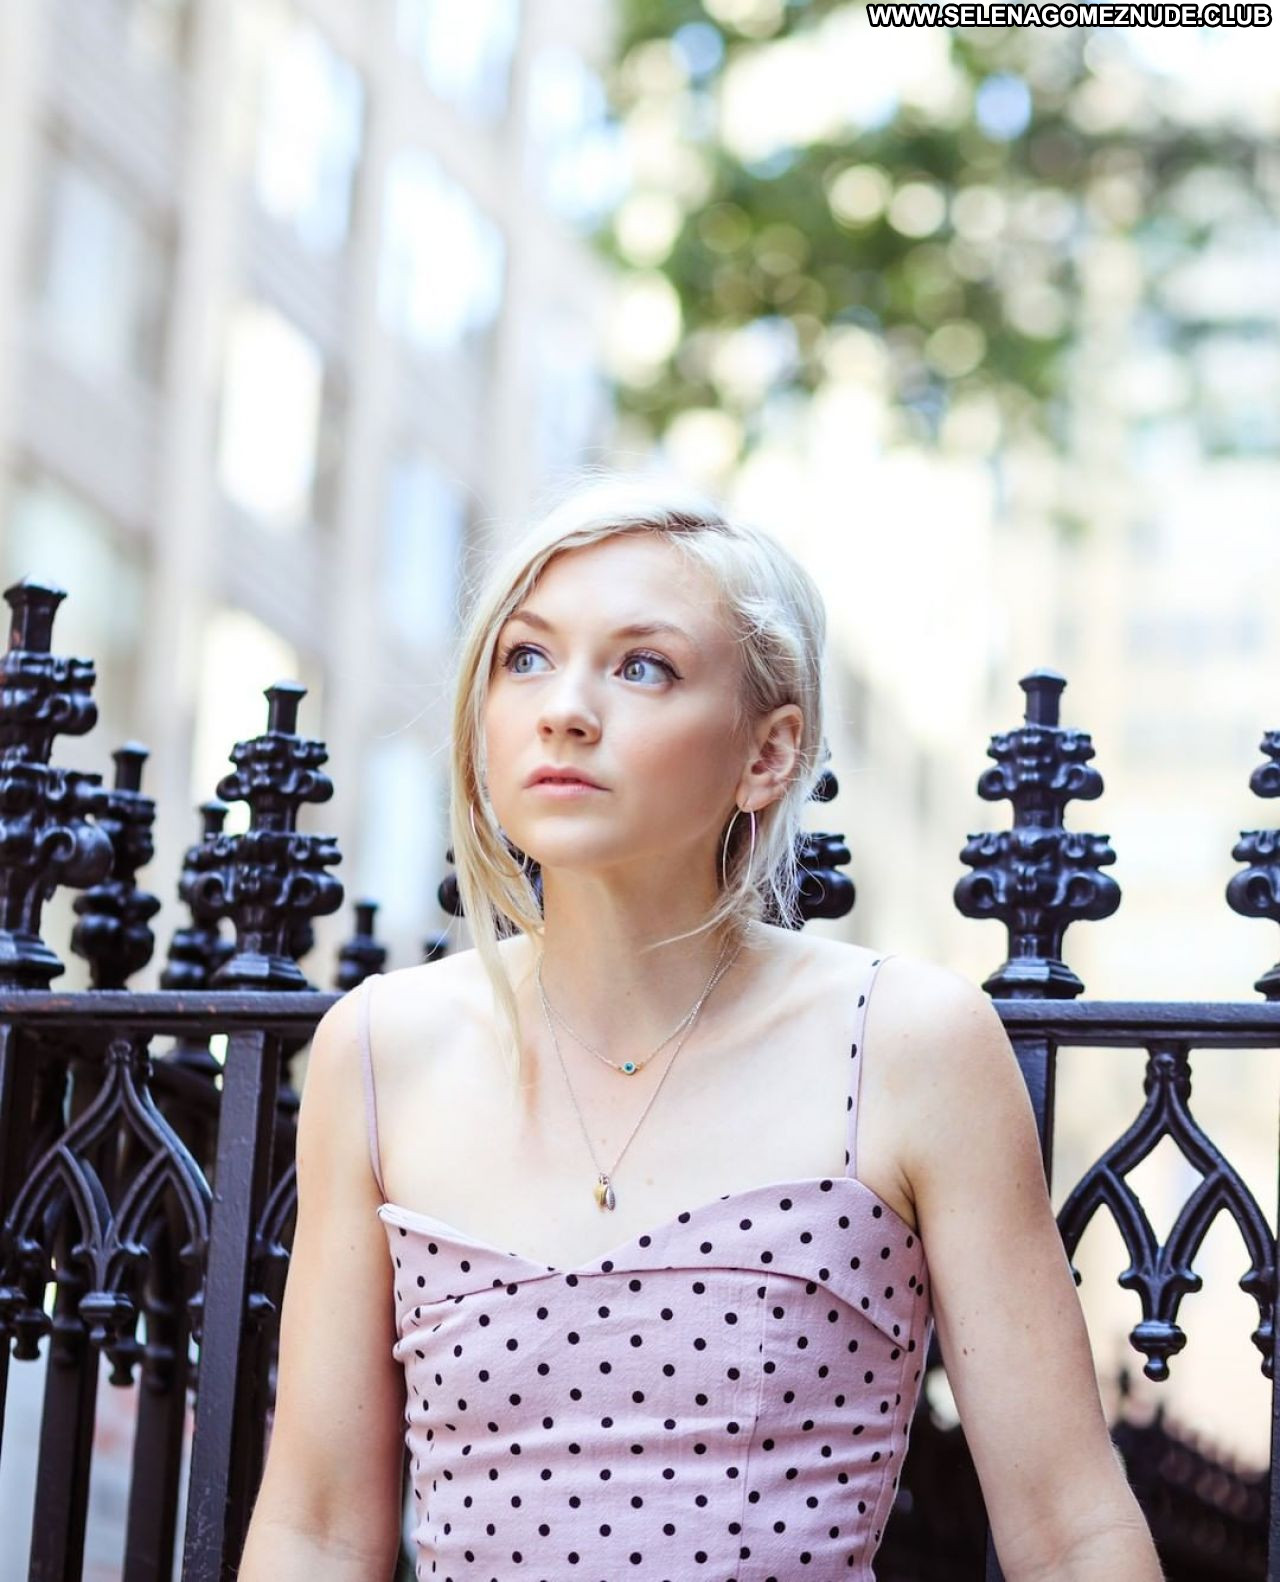 Pics emily kinney sexy 15 Pictures